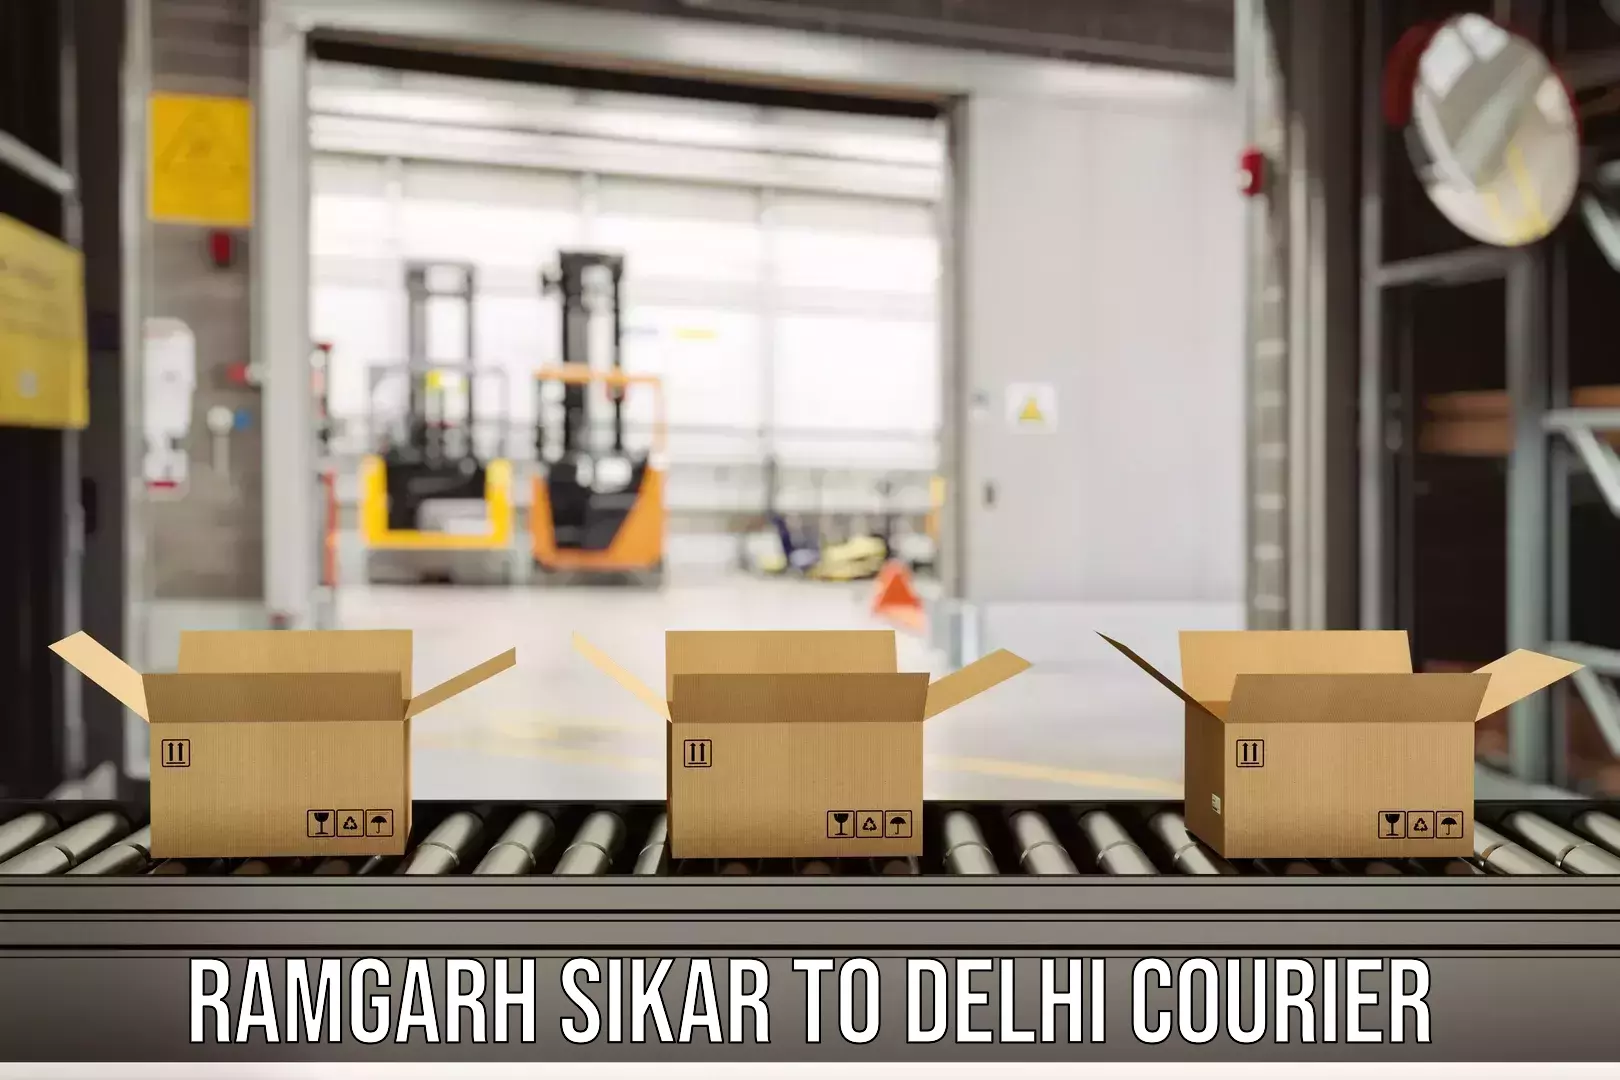 Reliable courier service Ramgarh Sikar to NIT Delhi